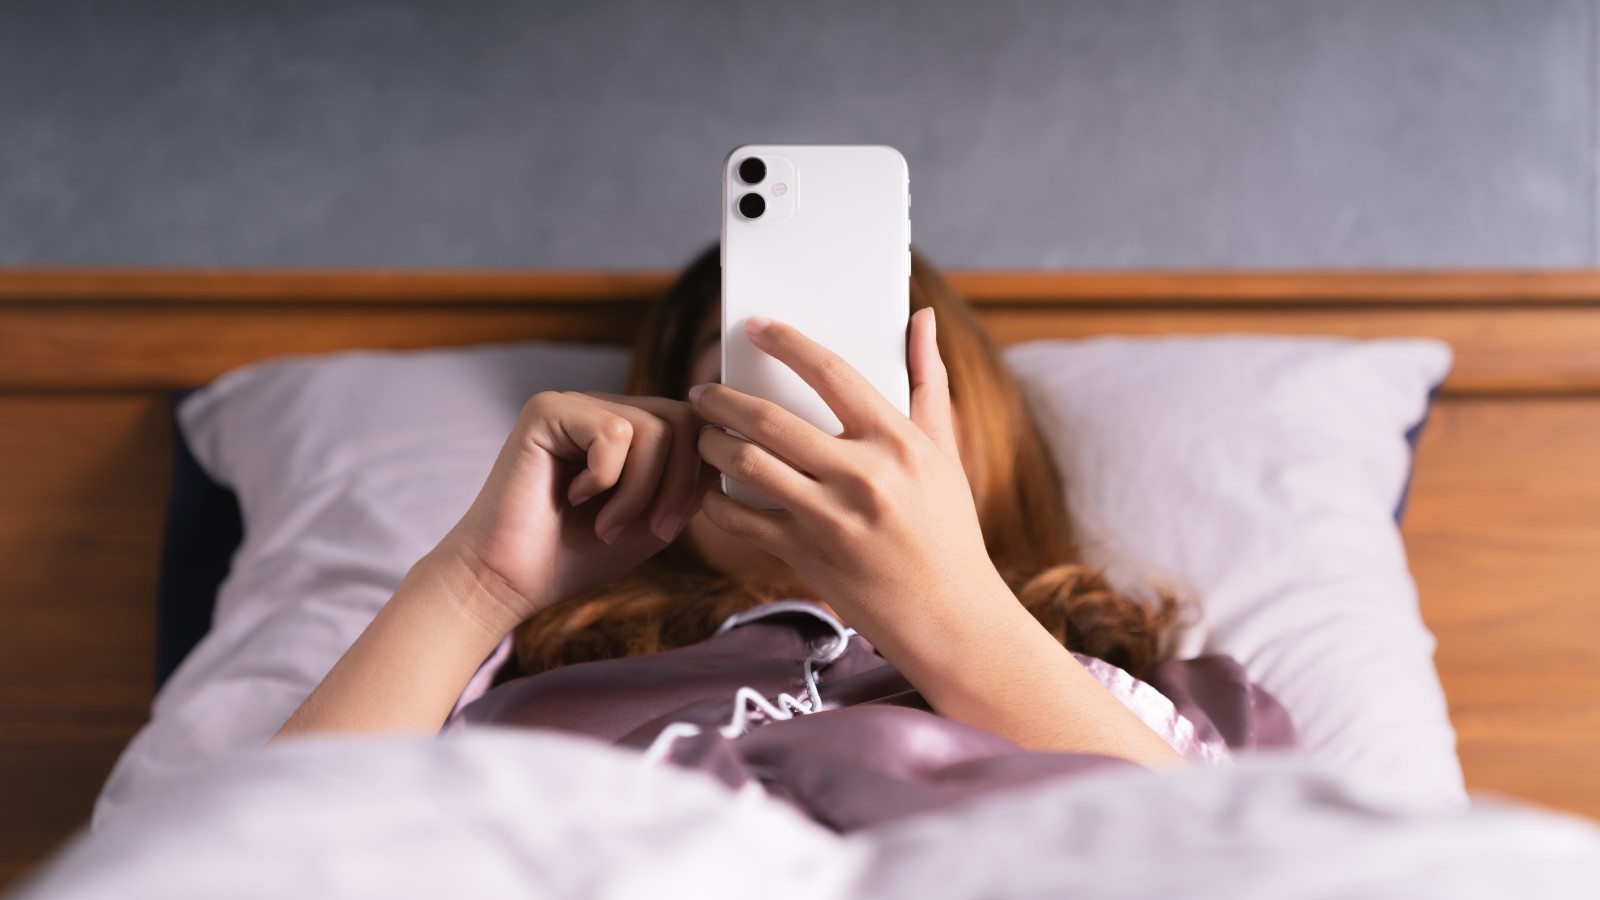 10 side effects of using a phone early in the